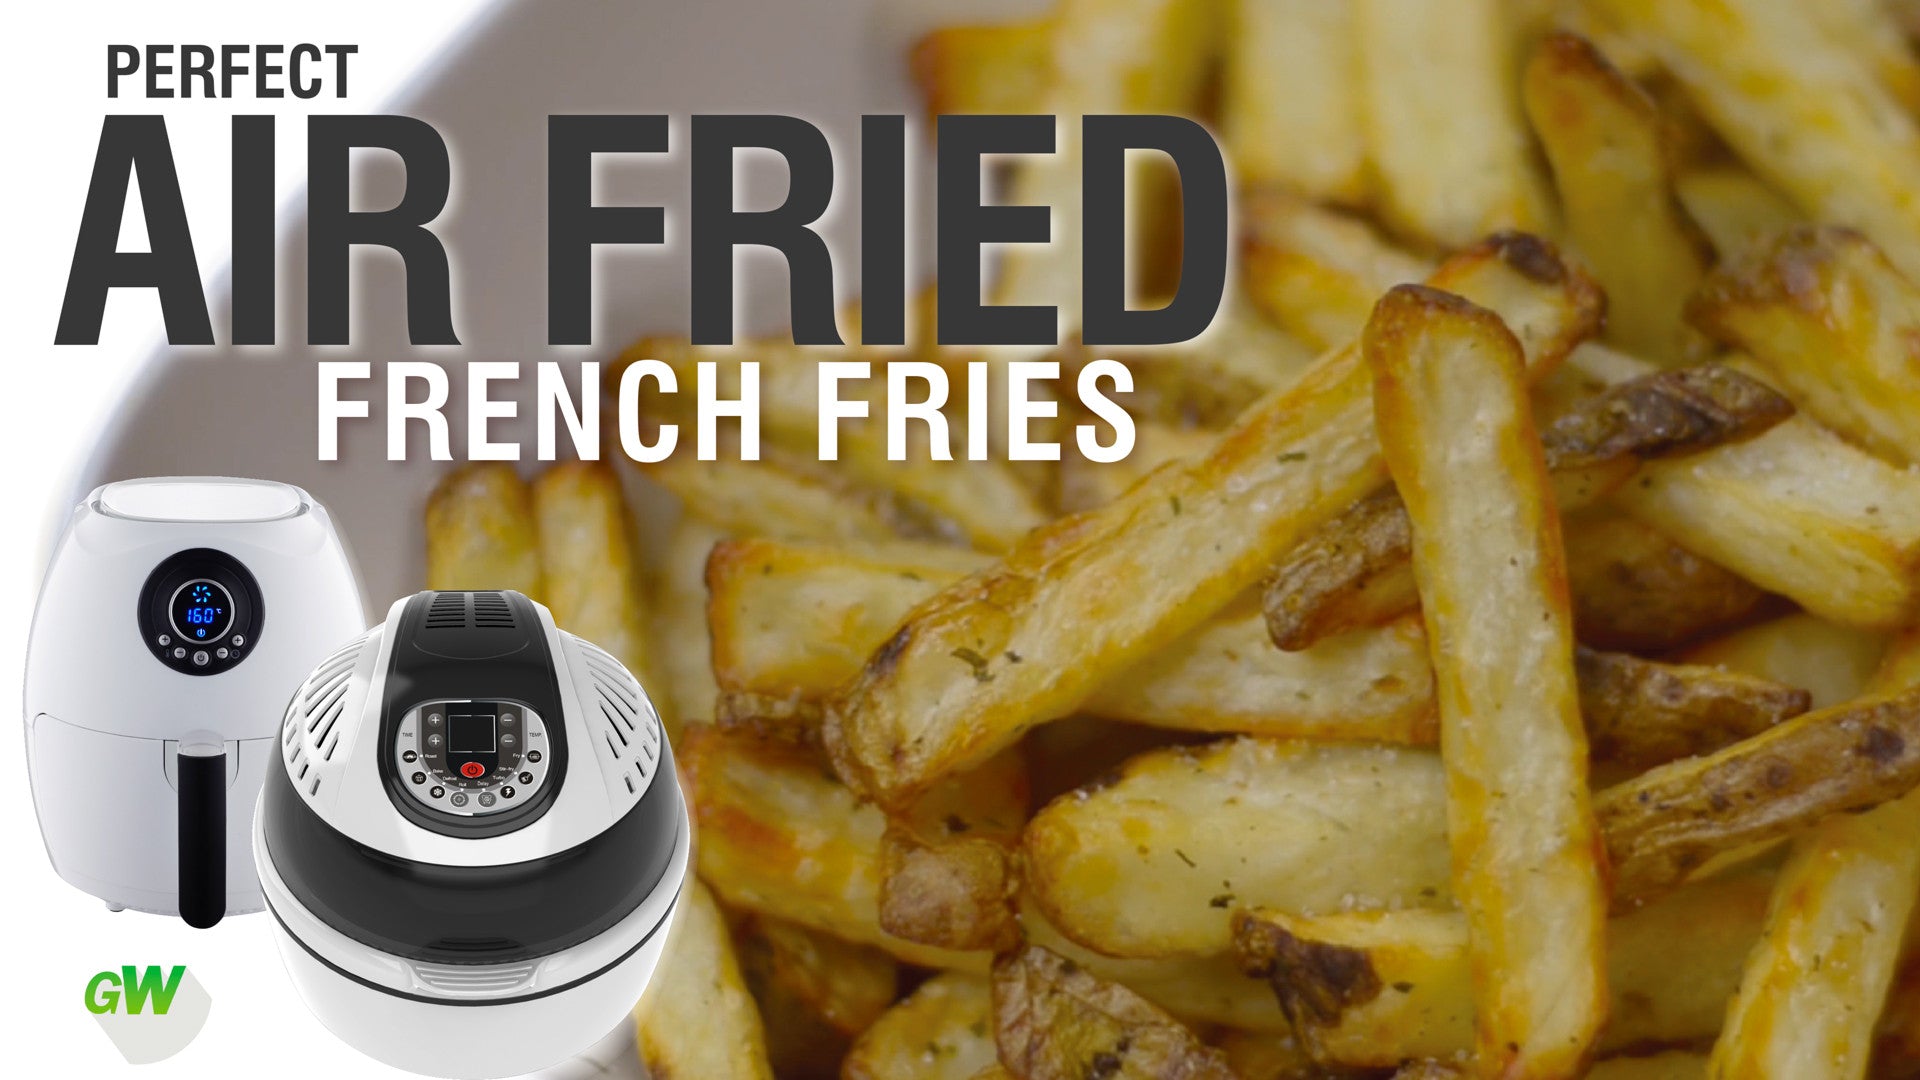 Perfect Air Fryer French Fries